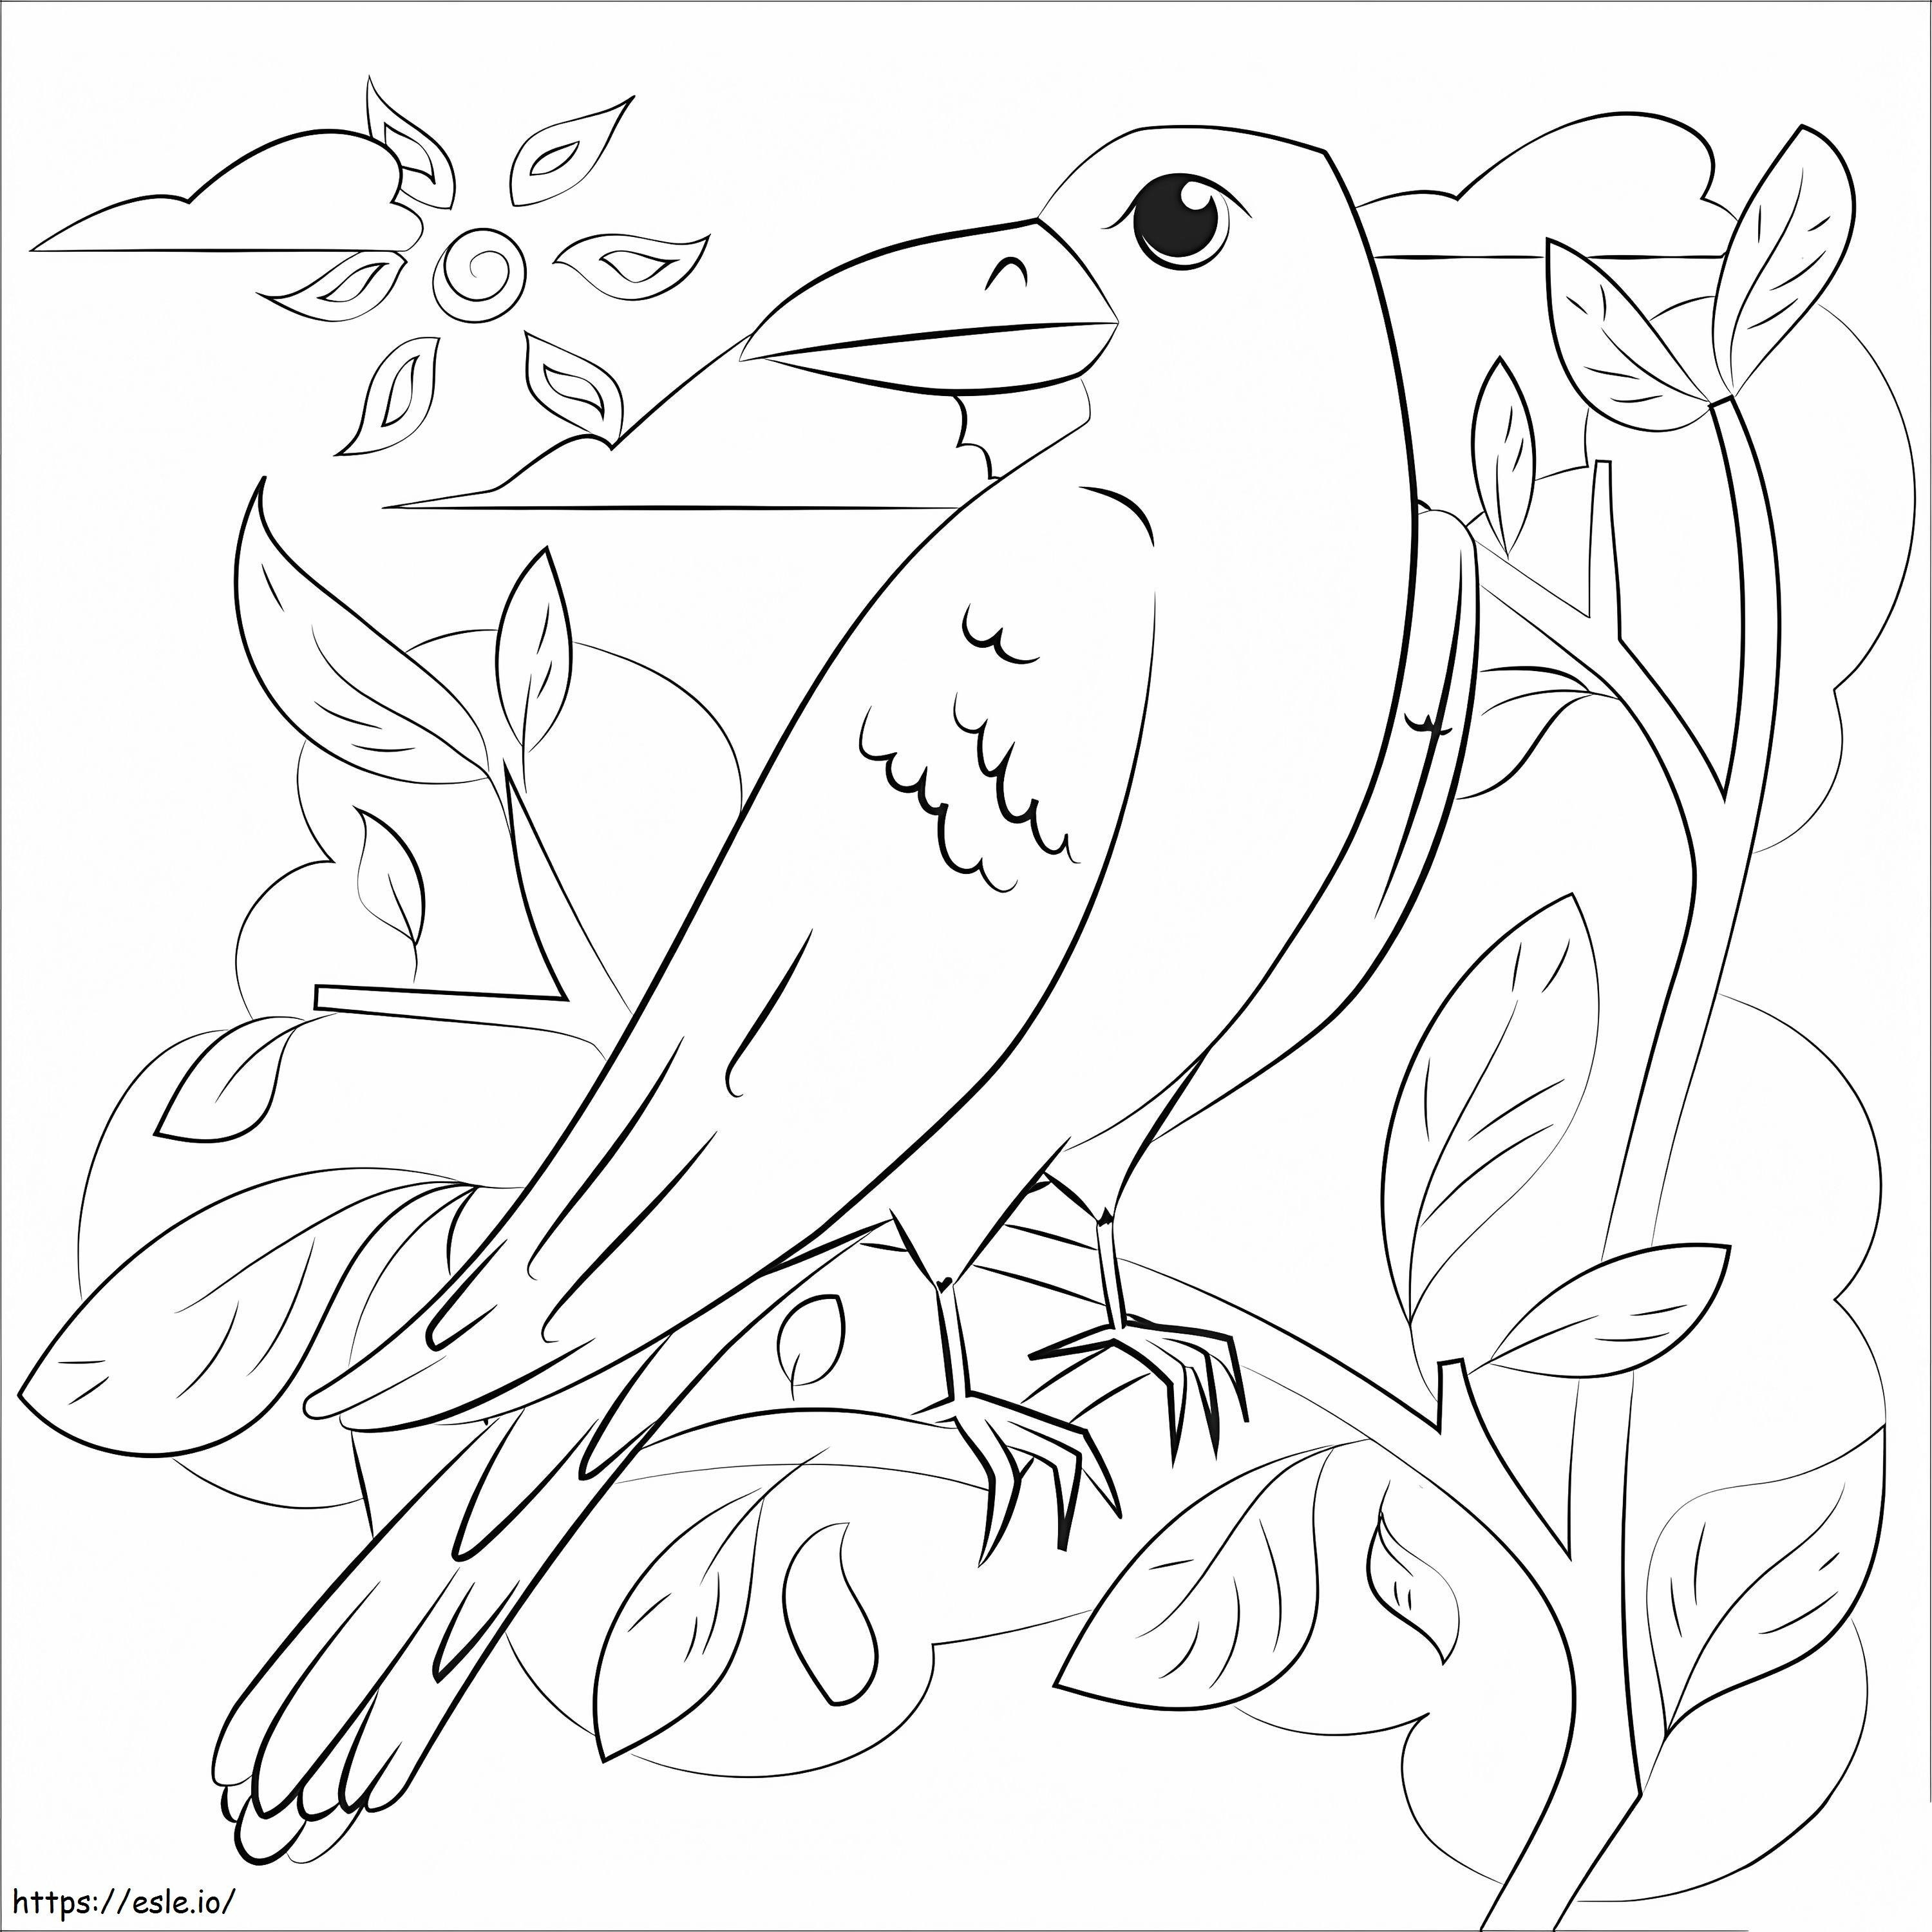 Cute Raven coloring page